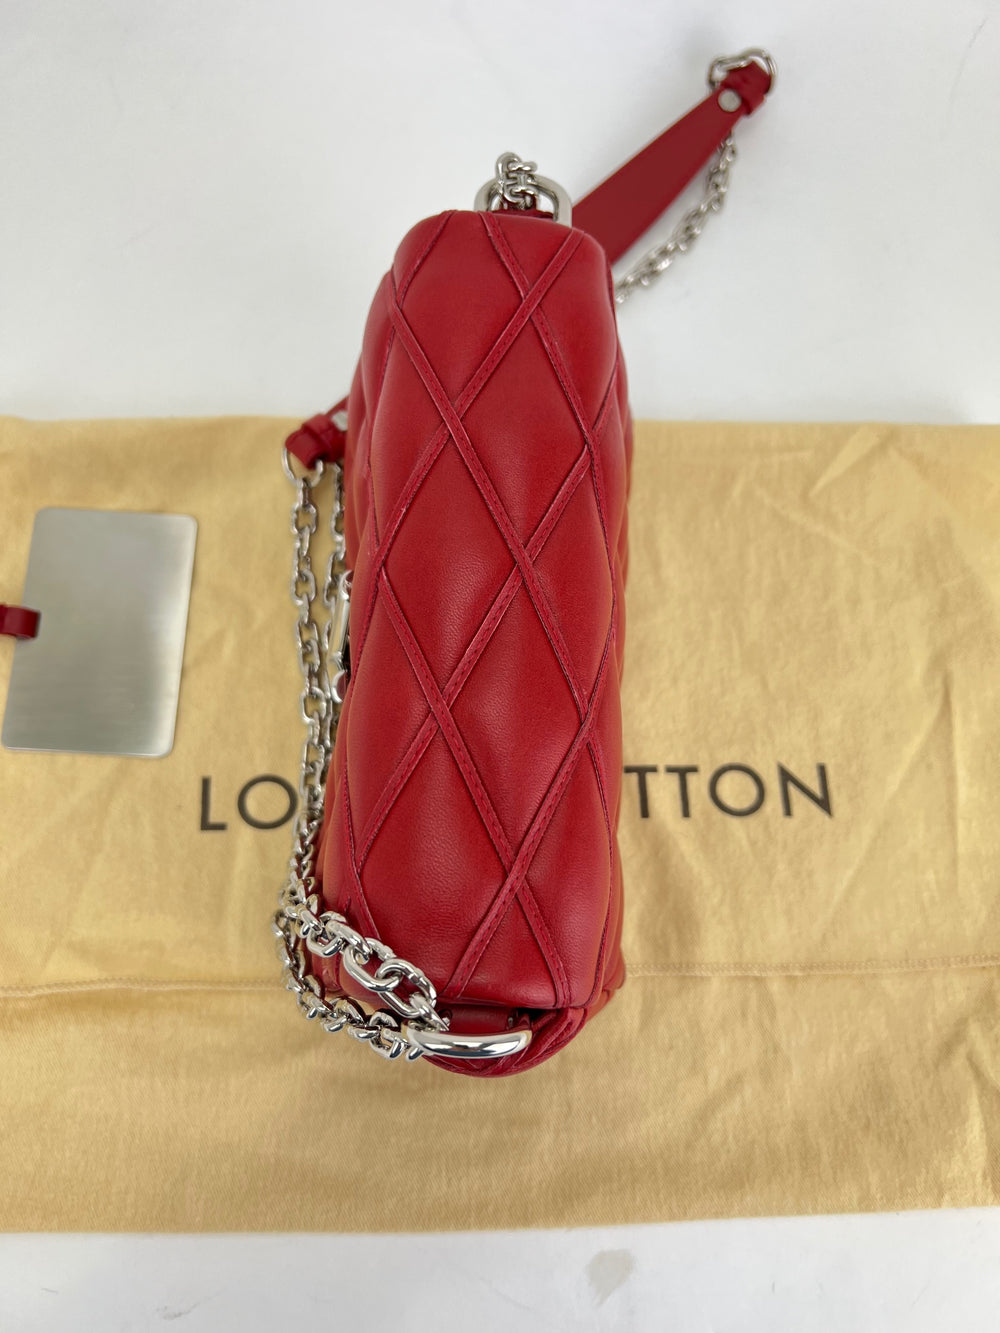 Louis Vuitton Silver Quilted Lambskin Leather GO-14 Malletage PM Bag Louis  Vuitton